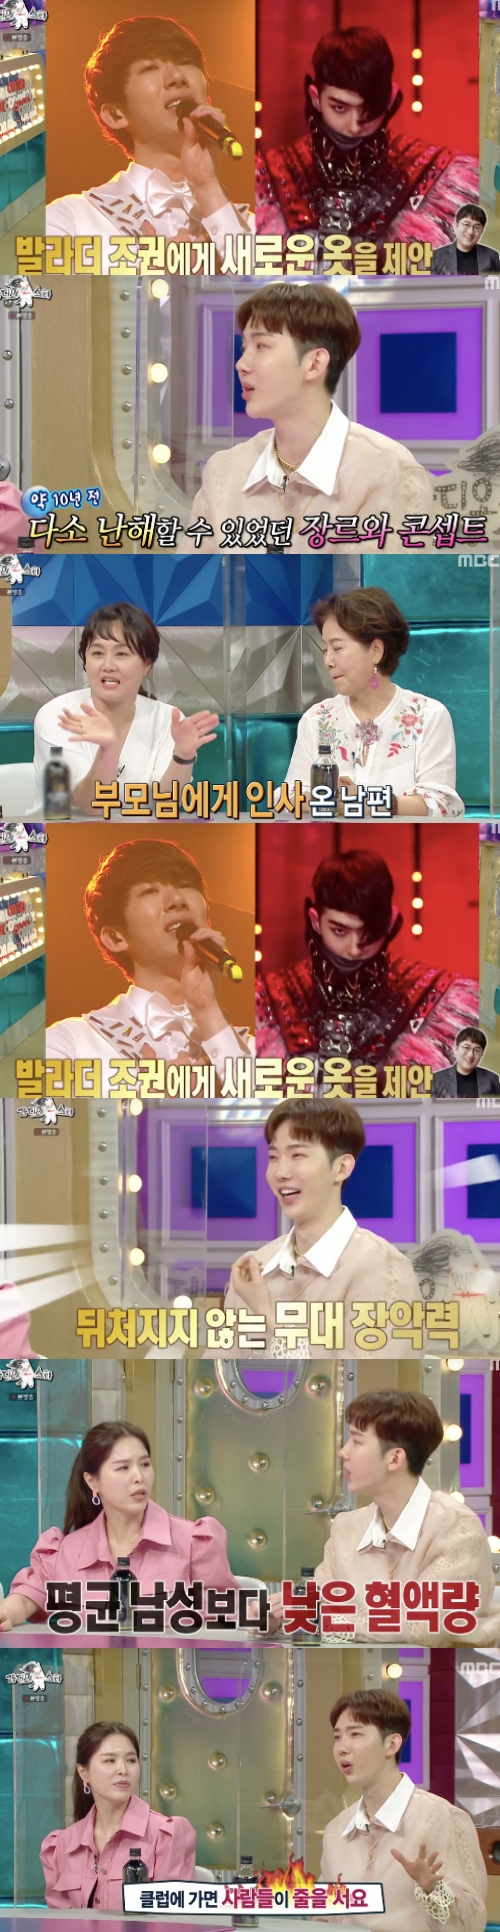 In Radio Star, Jo Kwon mentioned the 2AM comeback activity, and from the anecdote that suffered from pelvic disease due to hair dancing, he reported a sad anecdote that only Transfusion transmitted virus received 6 packs.On MBC entertainment Radio Star, which aired on the 30th, a special feature of Three Wheels was broadcast on the airCho Kwon, a blue-collar store, appeared on the day.On the 2AM return, Jo Kwon said, Everyone has been in a long gap for seven years, he said. The company is different, but we are discussing a comeback positively.I asked the members about their recent situation naturally.Jo Kwon said, Everything is good, Changmin writes and writes trots in Namyangju, and while he is a producer, Imsung is doing well, Jinwoon is doing well ... well.MCs mentioned Jinwoons farewell to his ex-lover, Kyungri, saying, How long have you been through the pain of parting? Jo Kwon said, Is not it a concept that we have all accumulated?Jo Kwon also commented on the illness that occurred during entertainment, saying, There was no good place to be on a schedule, I was surprised to hear that my pelvis was twisted and my body was not blood when I went to the hospital.At some point I was dizzy, usually less blood than men, and only about six packs of transfusion transmitted virus, Jo Kwon recalled.Jo Kwon, who has now been healthy after receiving the therapy and Pilates, said, I have prepared a new close dance. He made a joke time for his seniors and transformed the Brave Girls Rollin into a friendship.Before Corona, when I went to the club, people lined up to try to get me and my pelvis, he said, referring to the Battle that challenged the character.Jo Kwon also recalled the song ANIMAL, saying, It is a song that is so exciting that SNS explosions.This song was featured by BTS Jay Hop before his debut.Jo Kwon reported that he was running back charts in almost 10 years abroad, including the Middle East, and said, I wore 19.5 centimeters of heels and went to a bogging dance like a fashion magazine at the time. He also showed maturity after he went to the army, saying, I felt something special, not unusual.Jo Kwon, who said that there was a regrettable choice, said, At that time, 2AM was JYP, but when I was working as a double agent with Big Hit, I was hit by the I can not send you dead written by Bang Si-Hyuk and asked about my future when I signed a contract with Big Hit.I wanted to be active only in one company at the time, so I went back to JYP, which was a long-time trainee, and now I regret it, the biggest building in Yongsan is a big hit, but now I can not even contact Bang Si-Hyuk, Jo Kwon said.Finally, Jo Kwon, who prepared a dance for his sisters, set up a stage for the dance with a dazzling close dance until the end, and after the dance, he burned his passion enough to hear that the lips were blue.Radio Star Capture